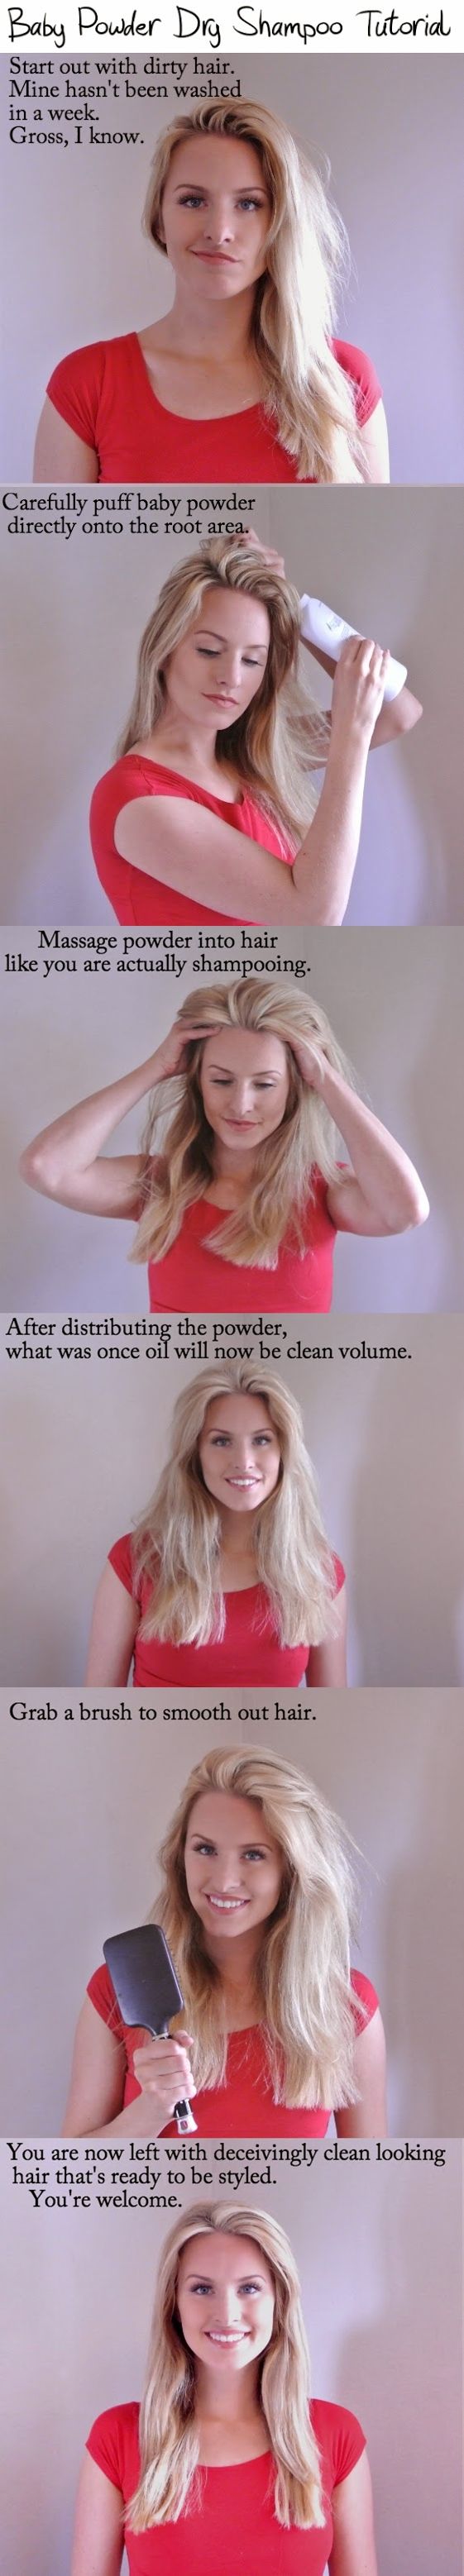 How to Dry shampoo with baby powder